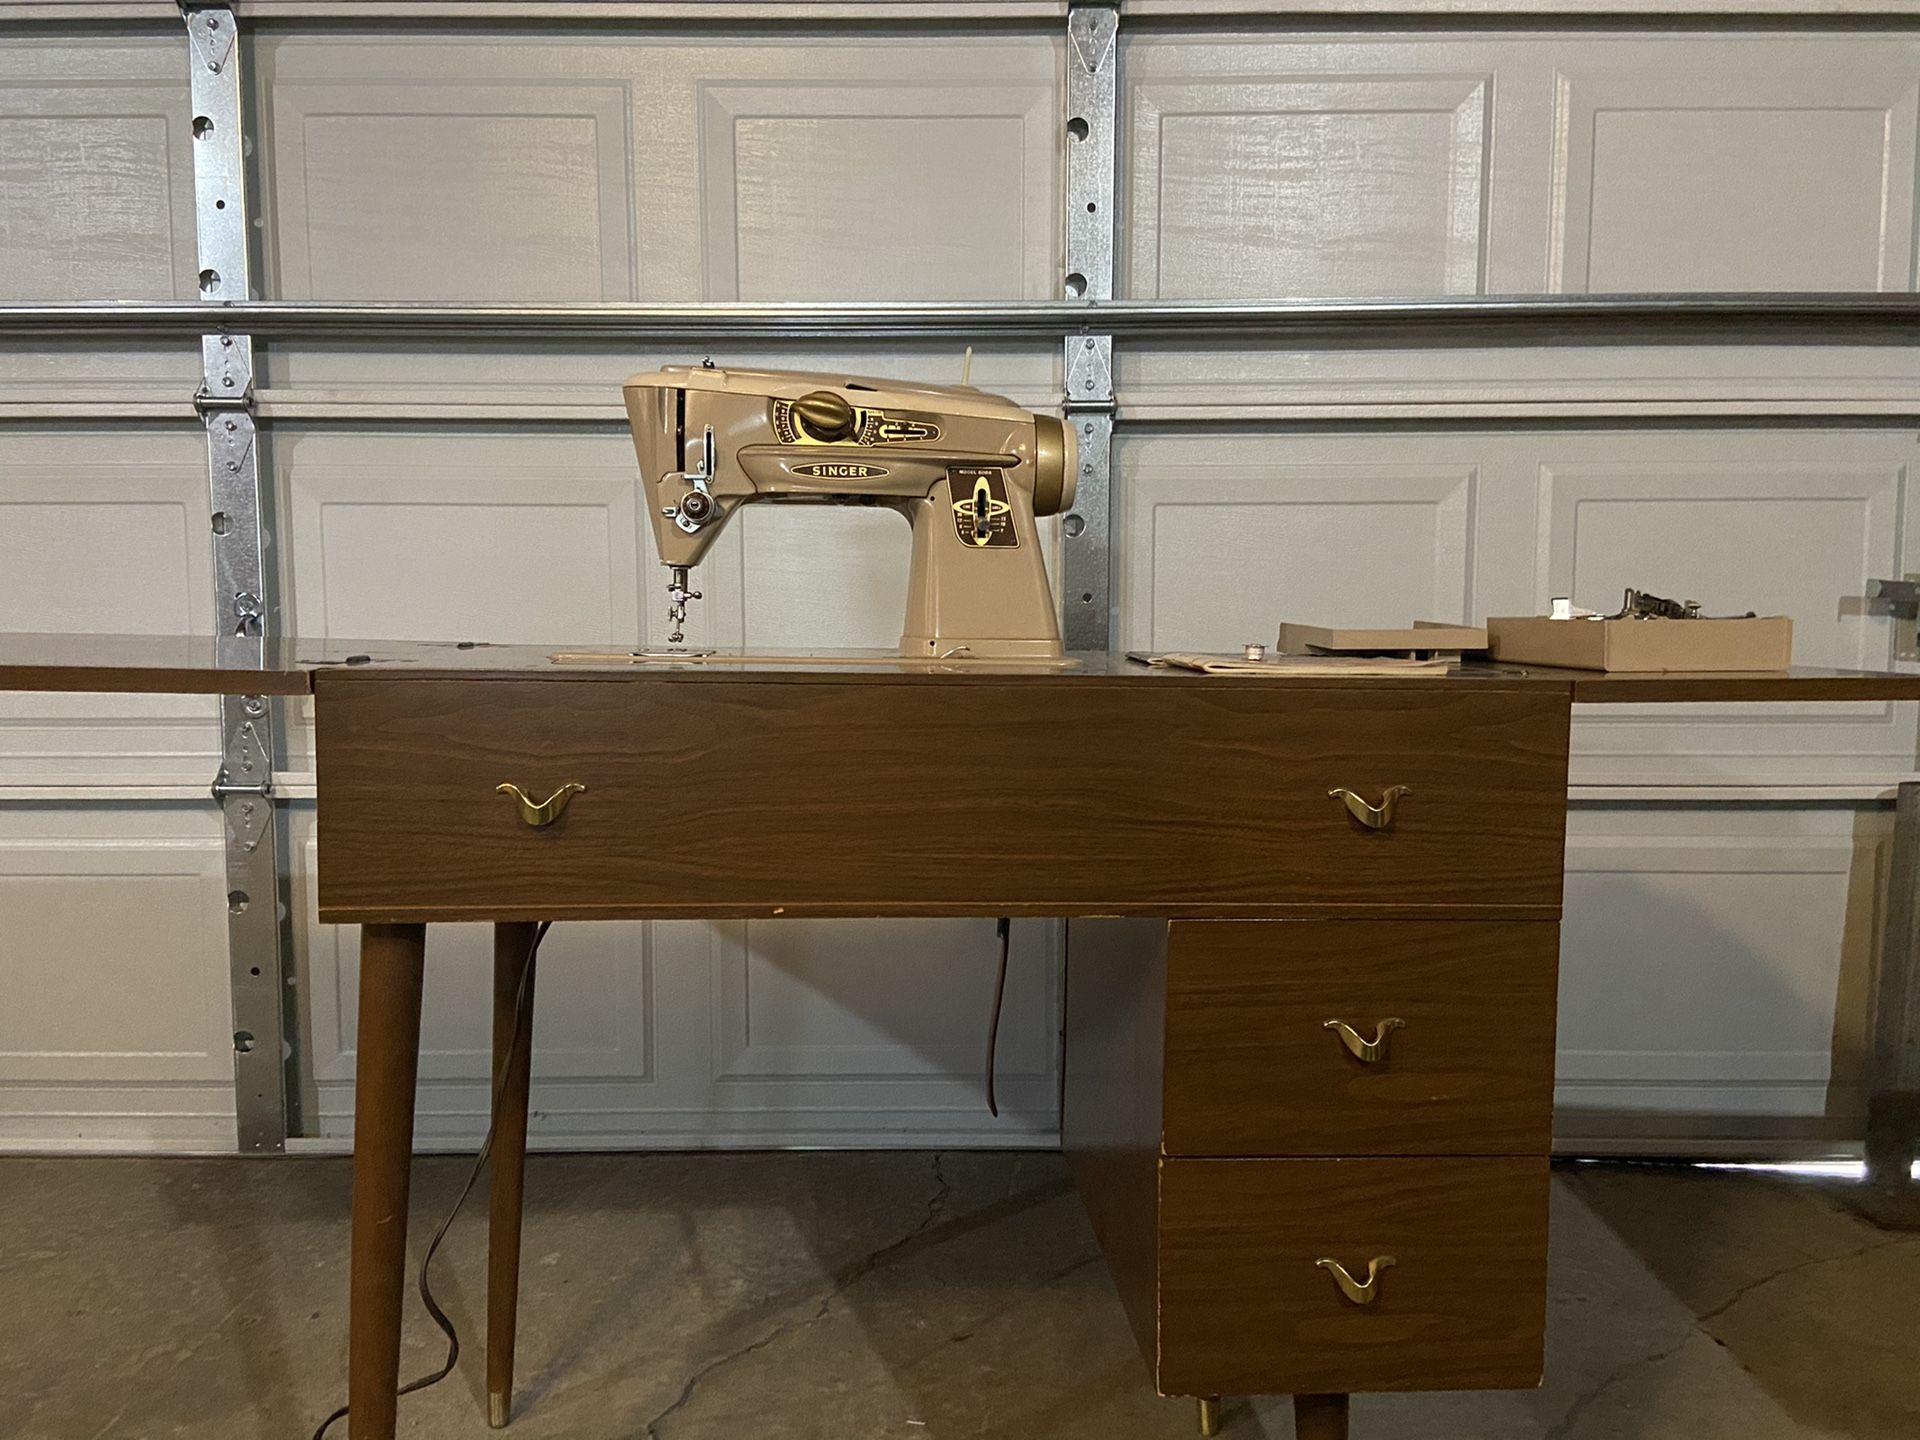 Sewing machine used working good. Antique, work’s good! It’s also used as a writing desk! Double function!